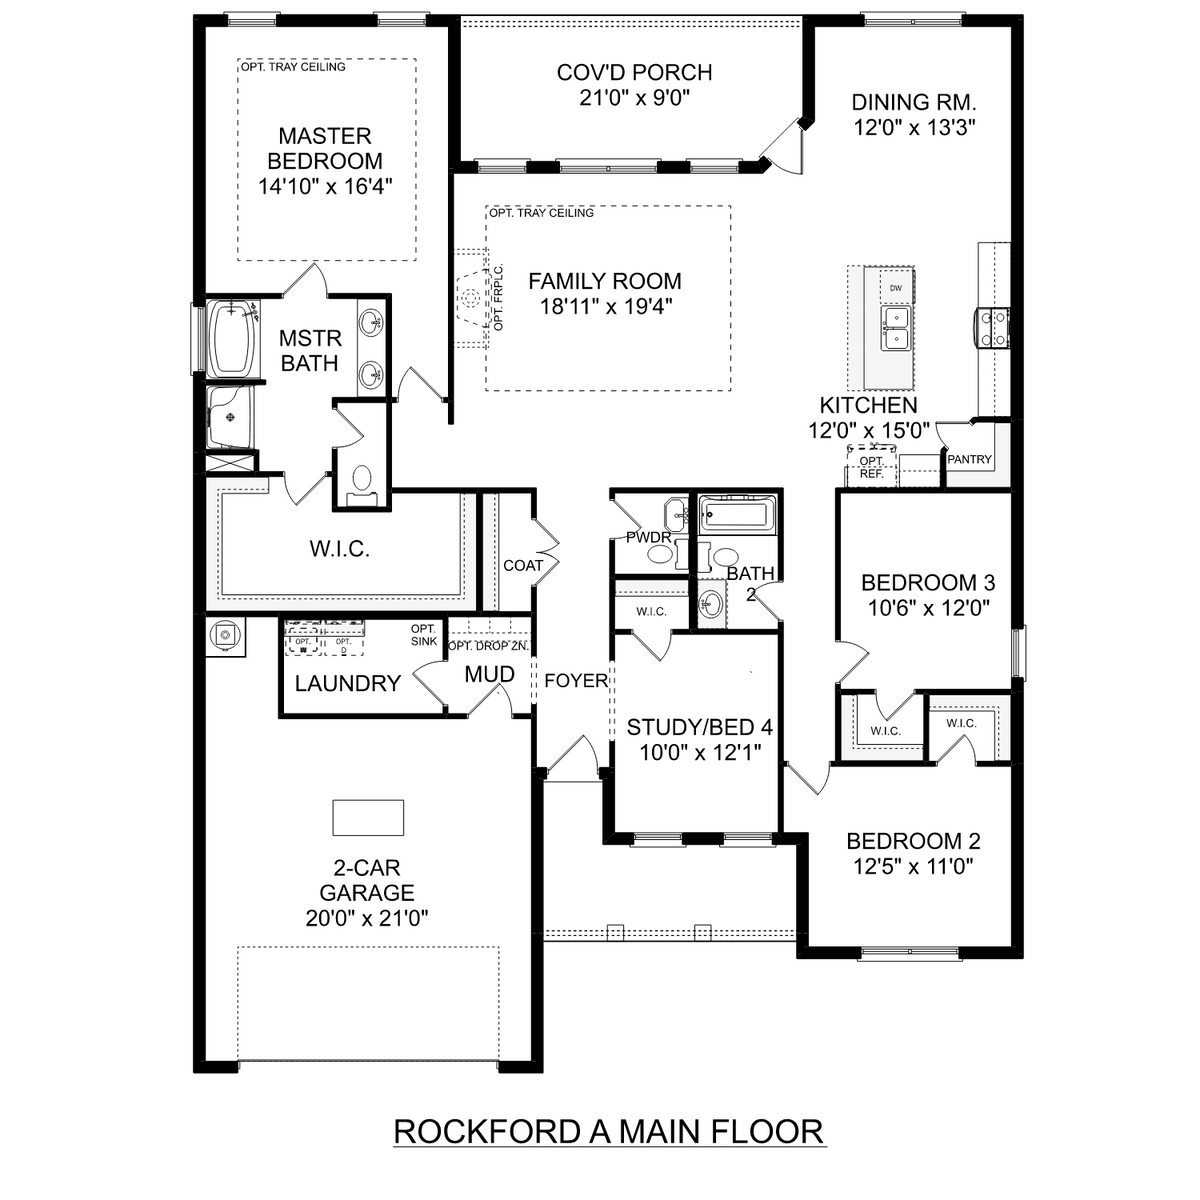 1 - The Rockford buildable floor plan layout in Davidson Homes' River Road Estates community.